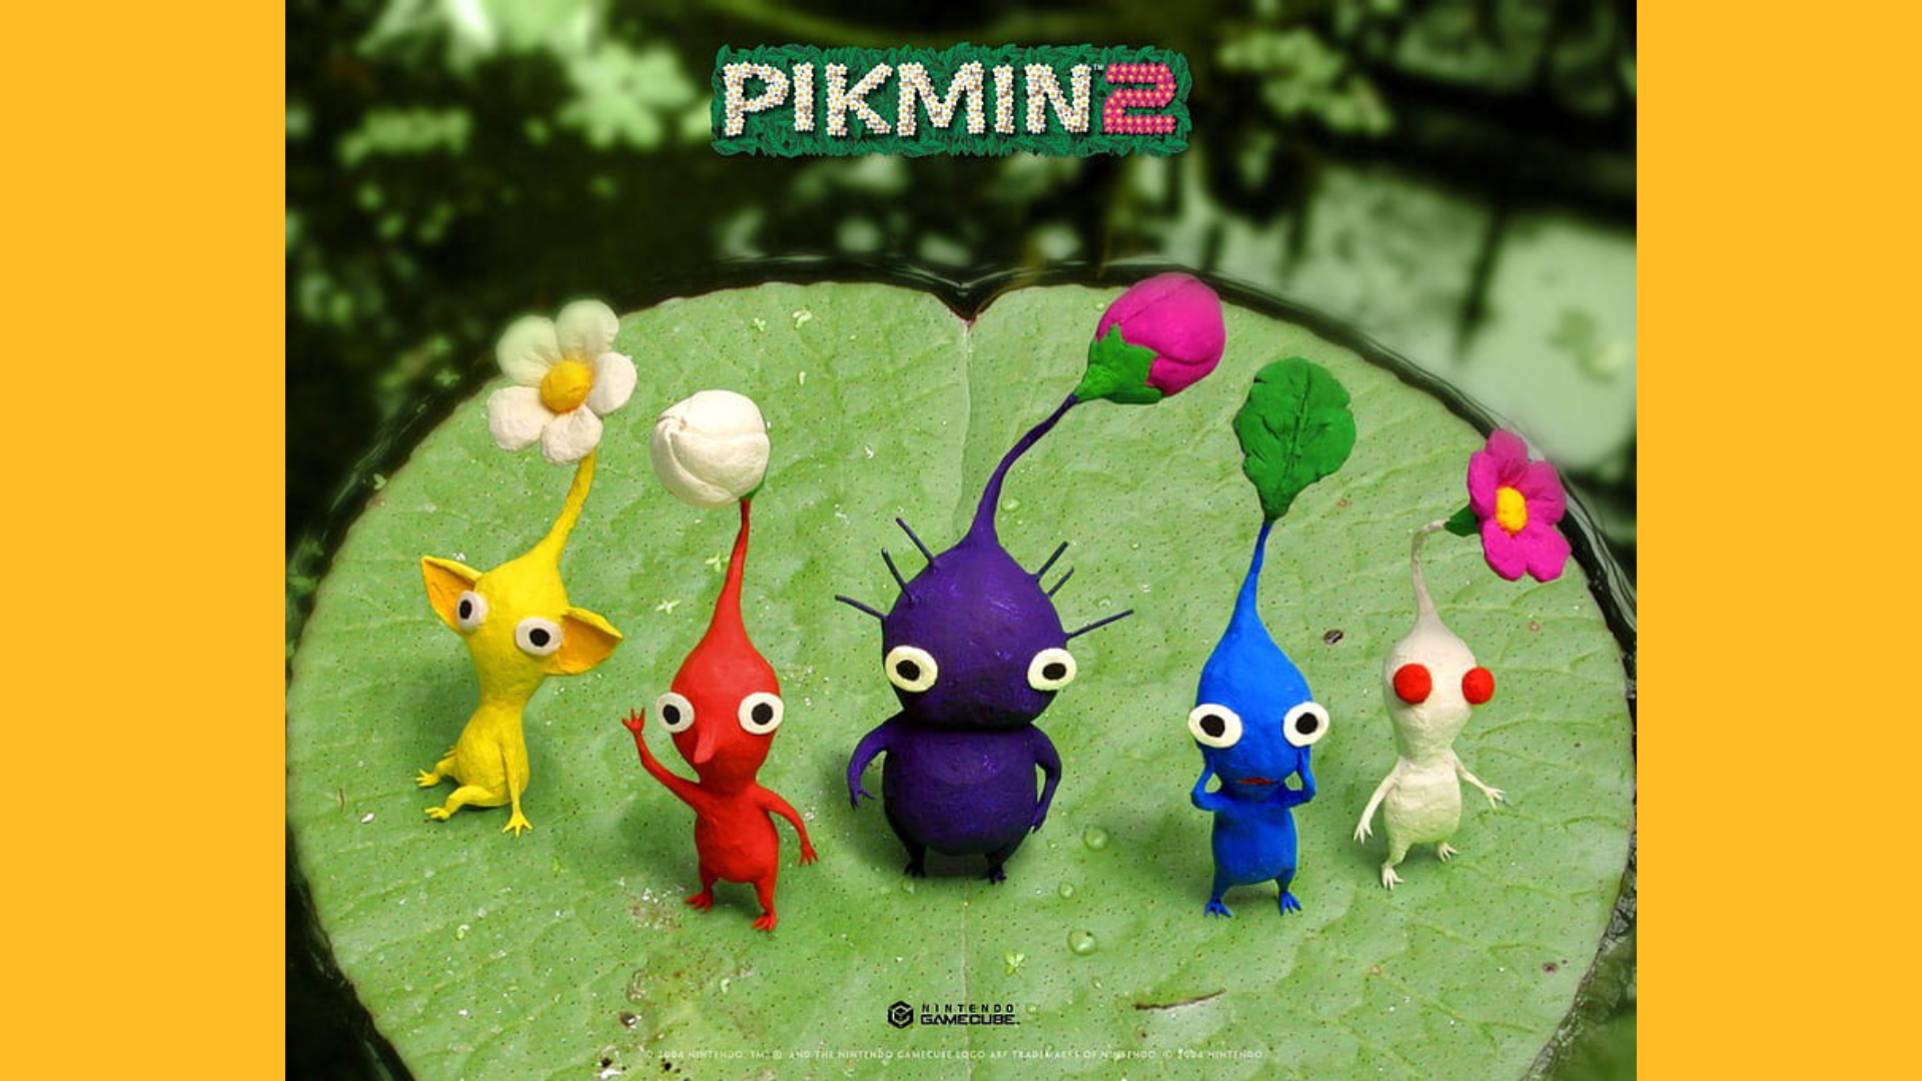 Concept for Pikmin 1/2 box art for a Switch port. If only it were real :  r/Pikmin